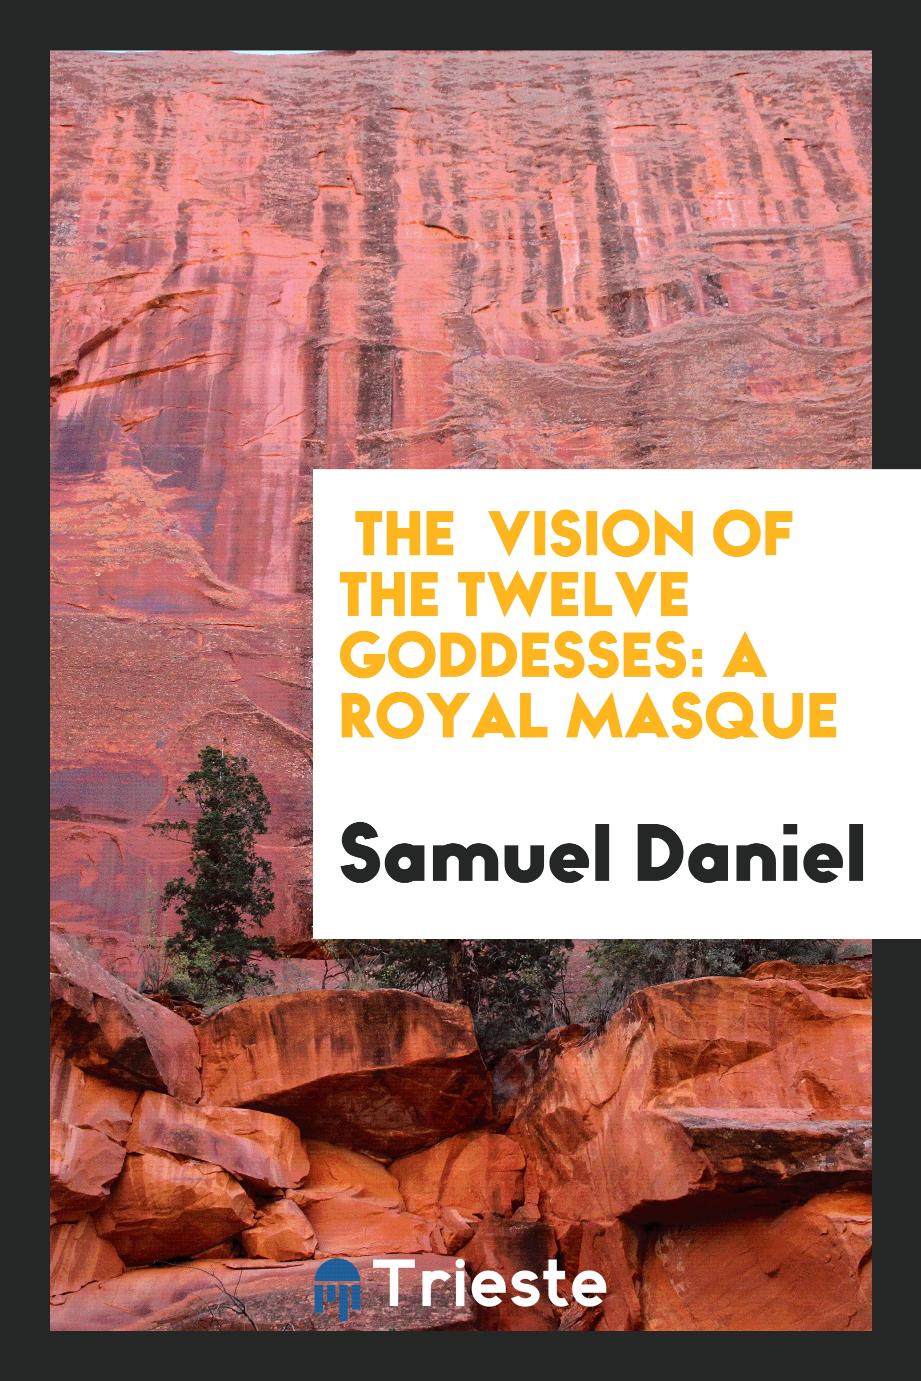 The Vision of the Twelve Goddesses: A Royal Masque